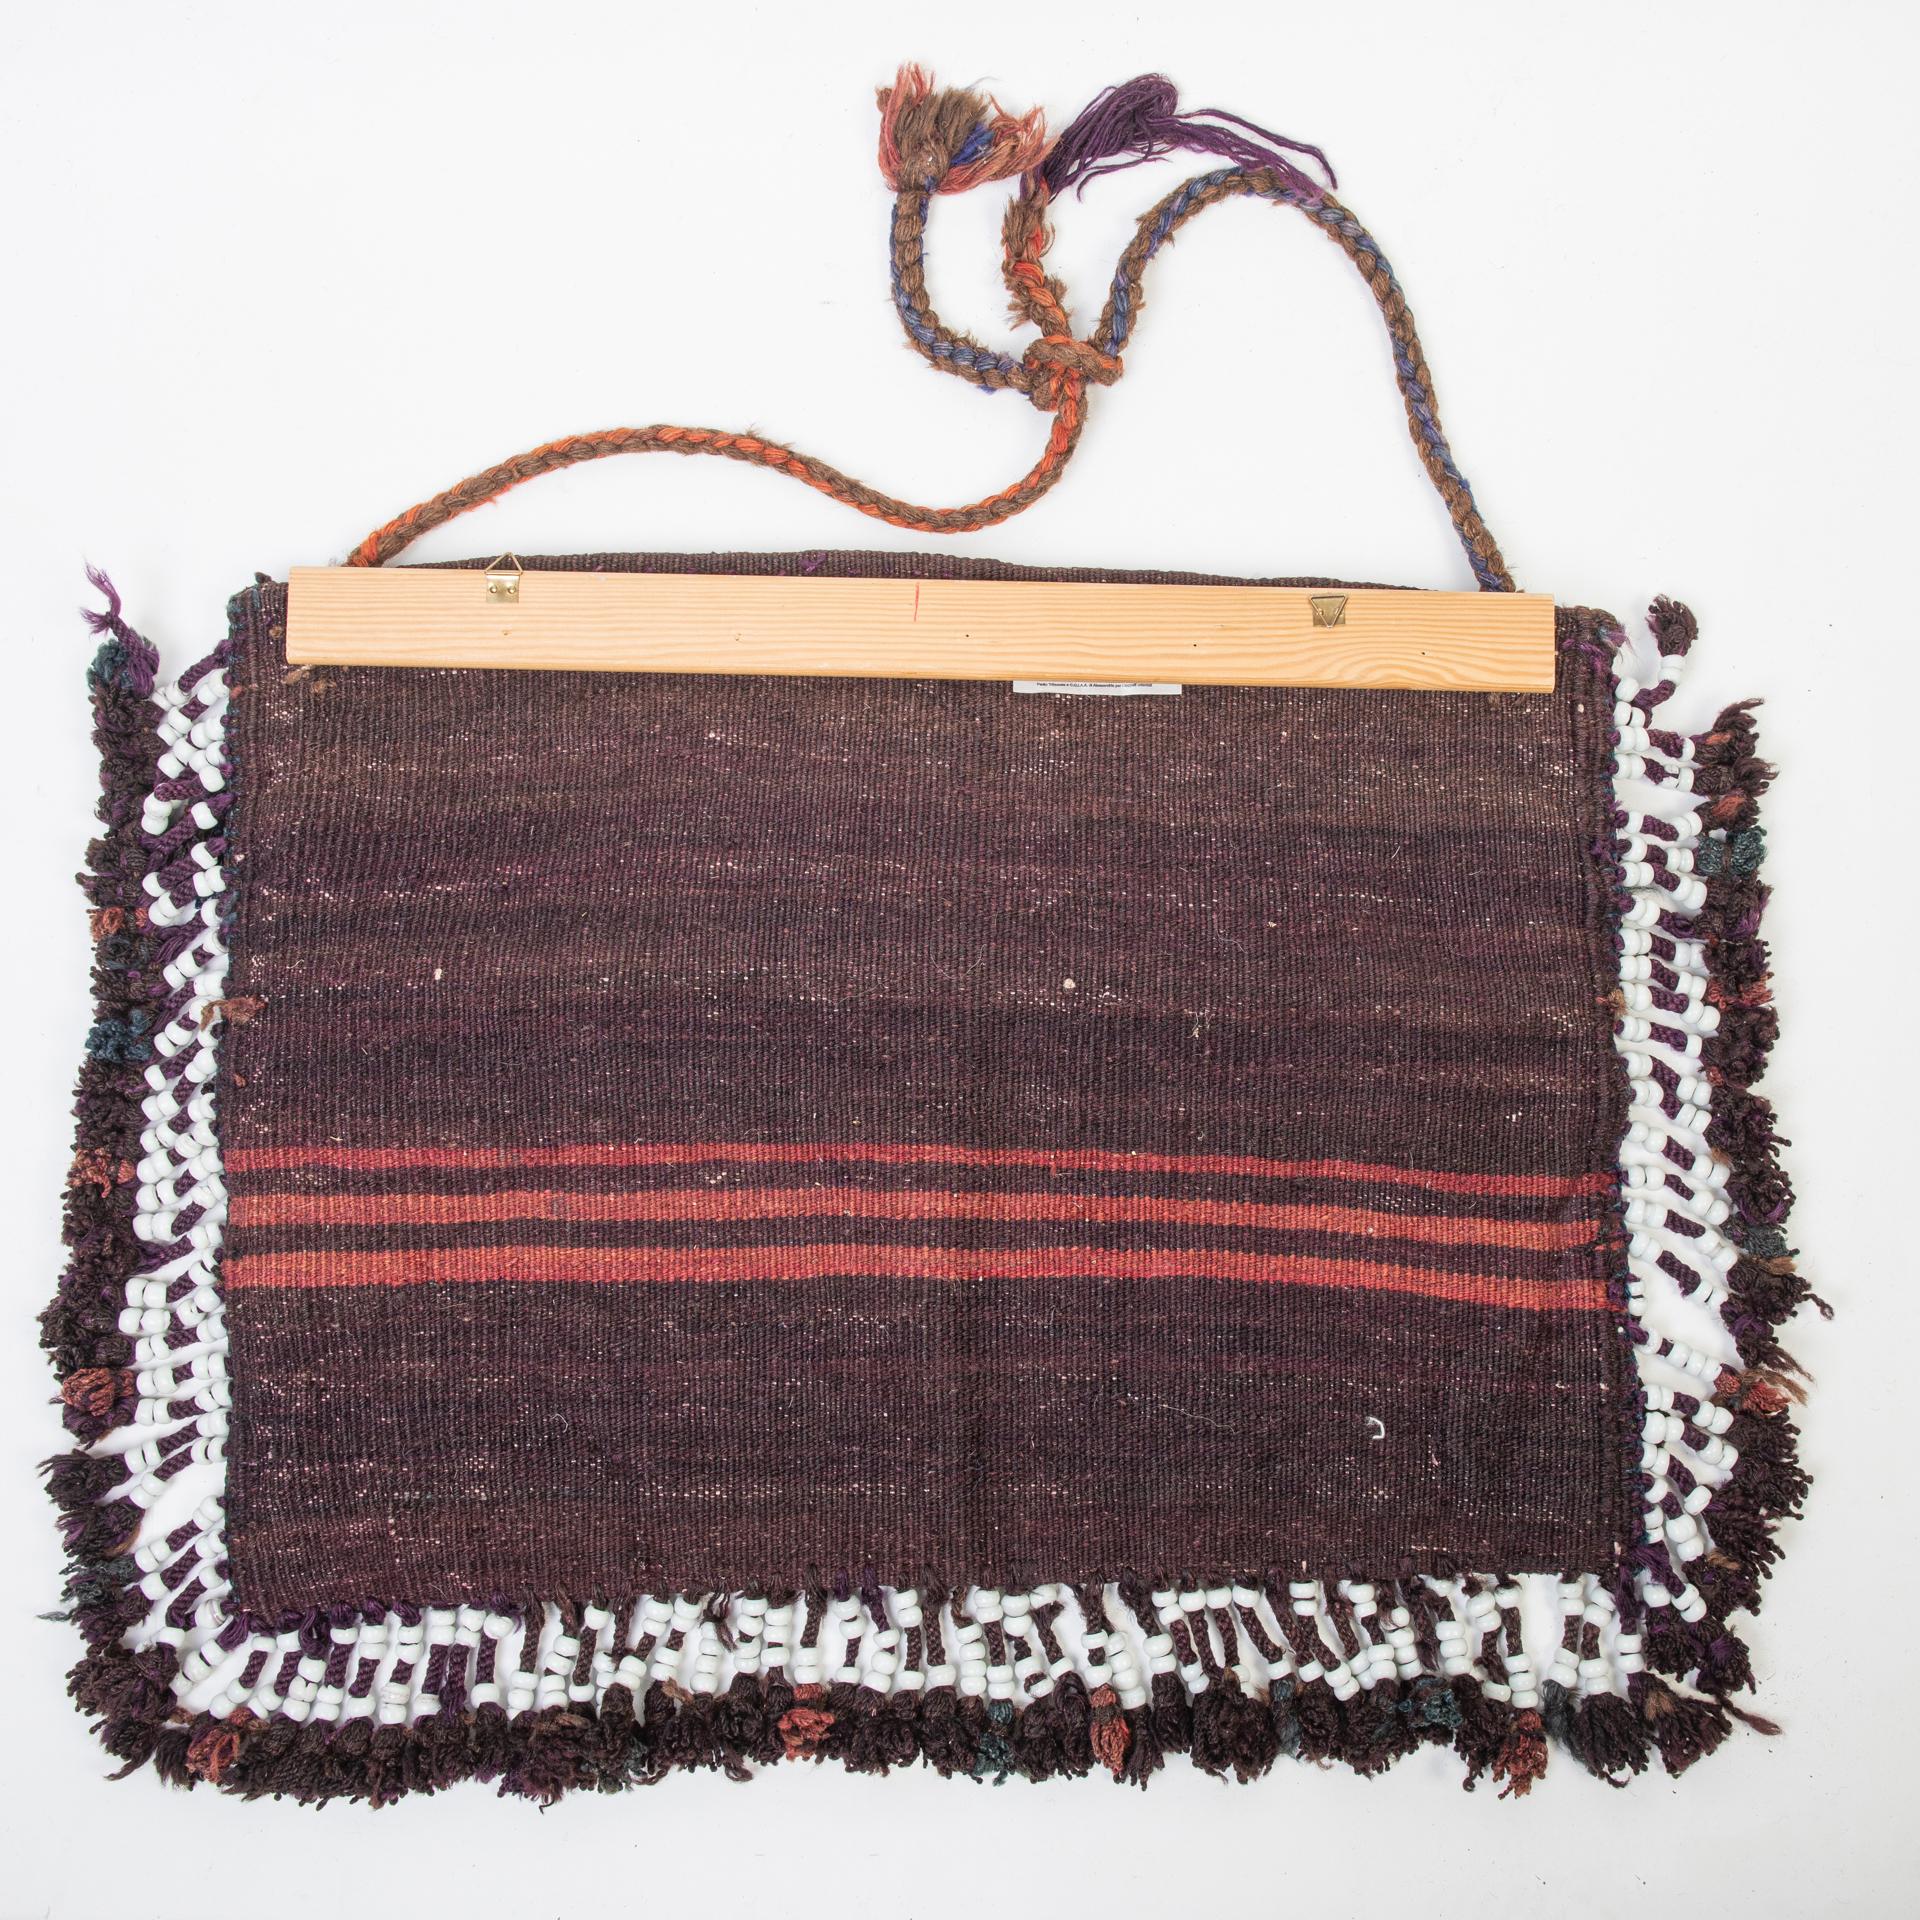 nr. 1375 - Old nomadic bag, woven by hand and decorated with rich fringes in white ceramic rings.  I fixed it on a wooden rod to hang it on the wall: it can become a comfortable bag for newspapers or other.
To hange on the sides of sofa or